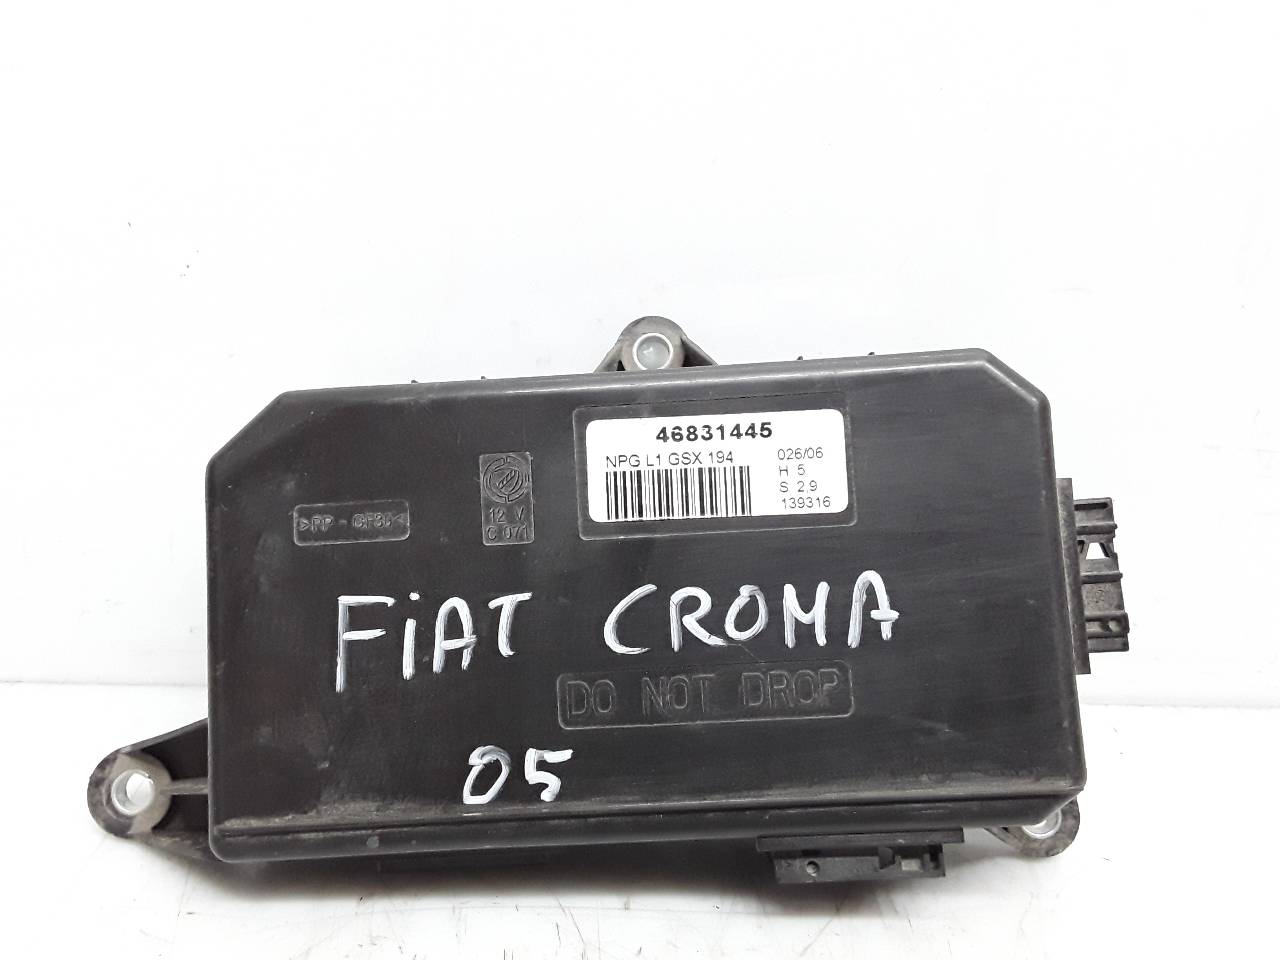 LDV Croma 194 (2005-2011) Other Control Units 46831445 19015531